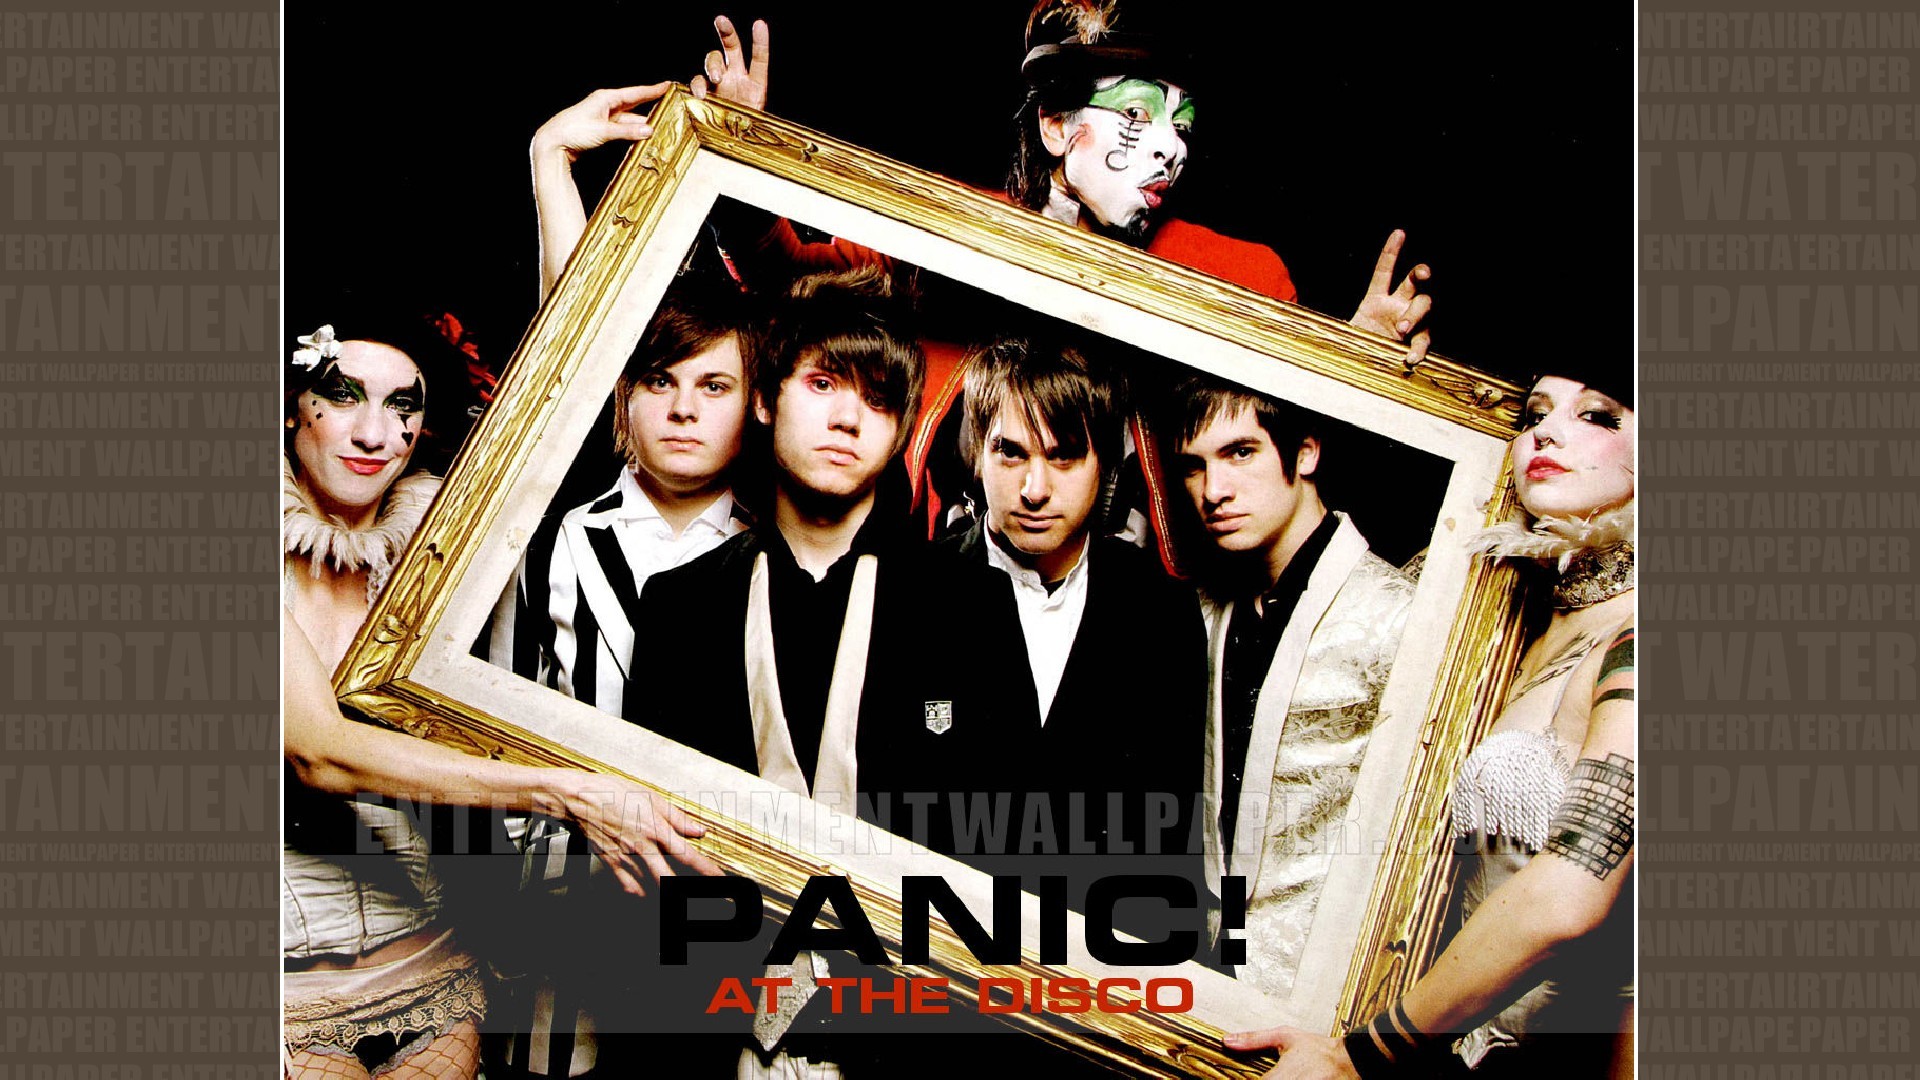 Panic At the Disco Wallpaper – Original size, download now.